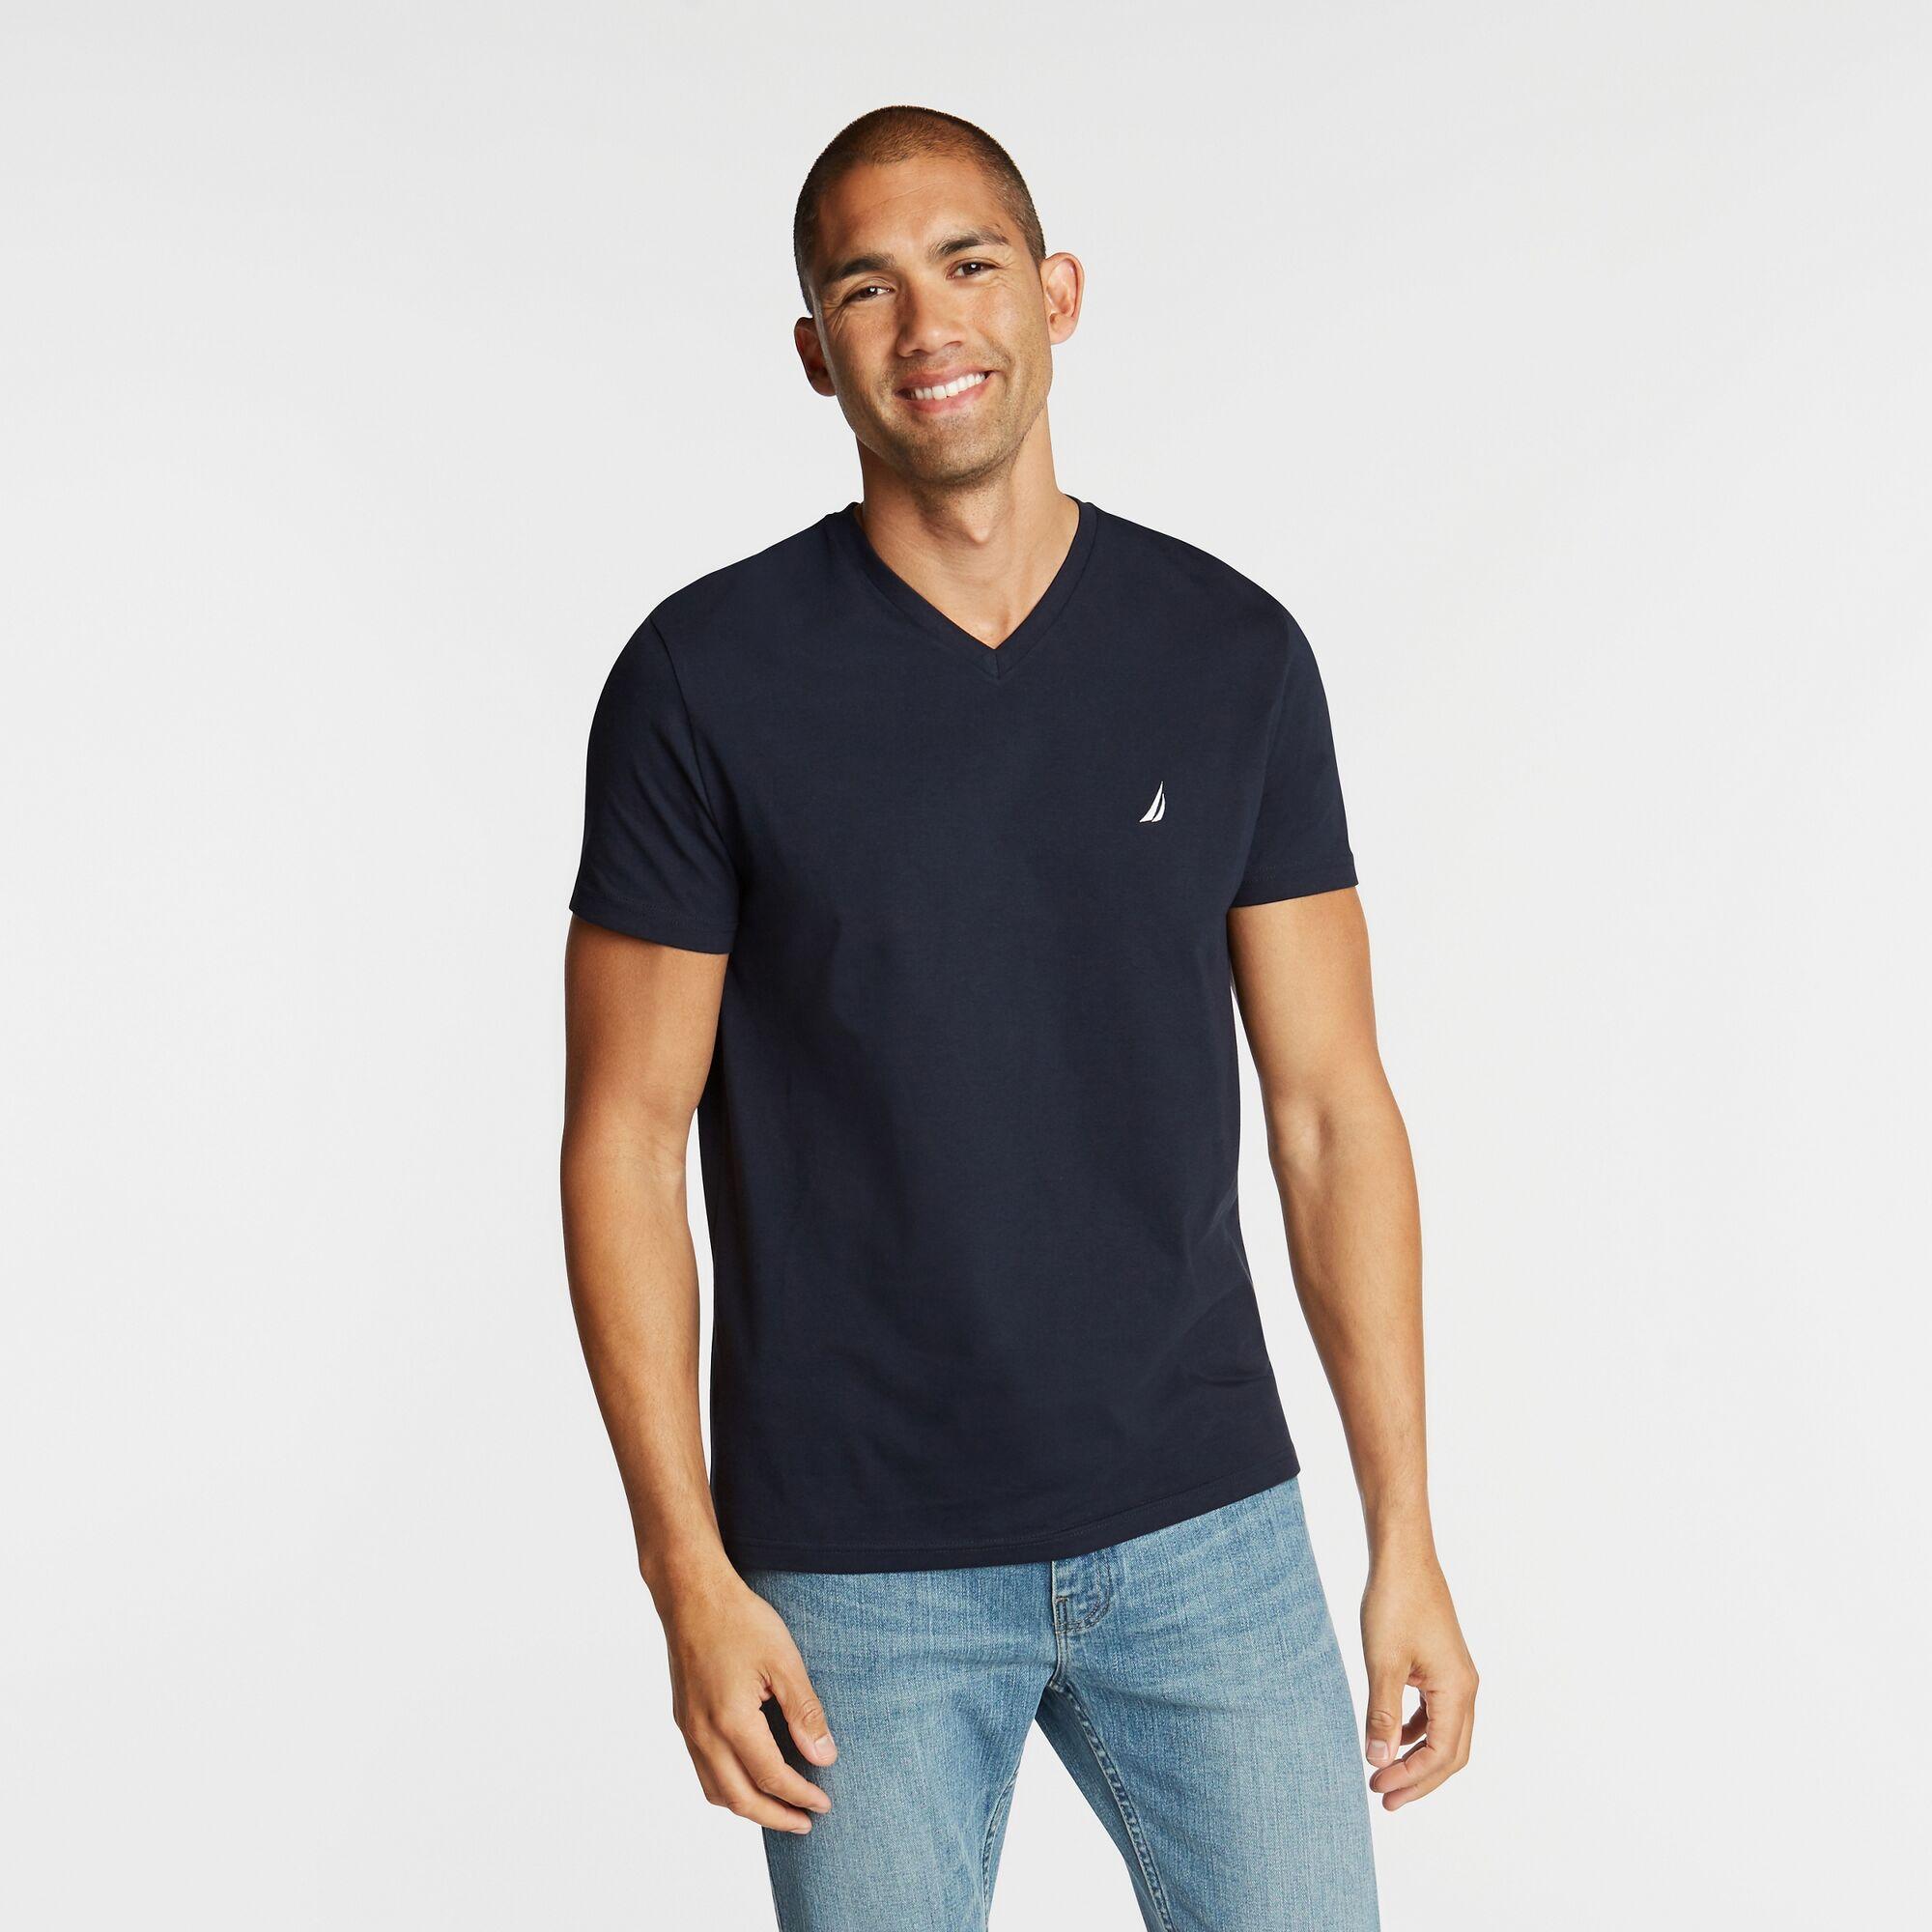  V- Neck Solid S/S Tee - Navy